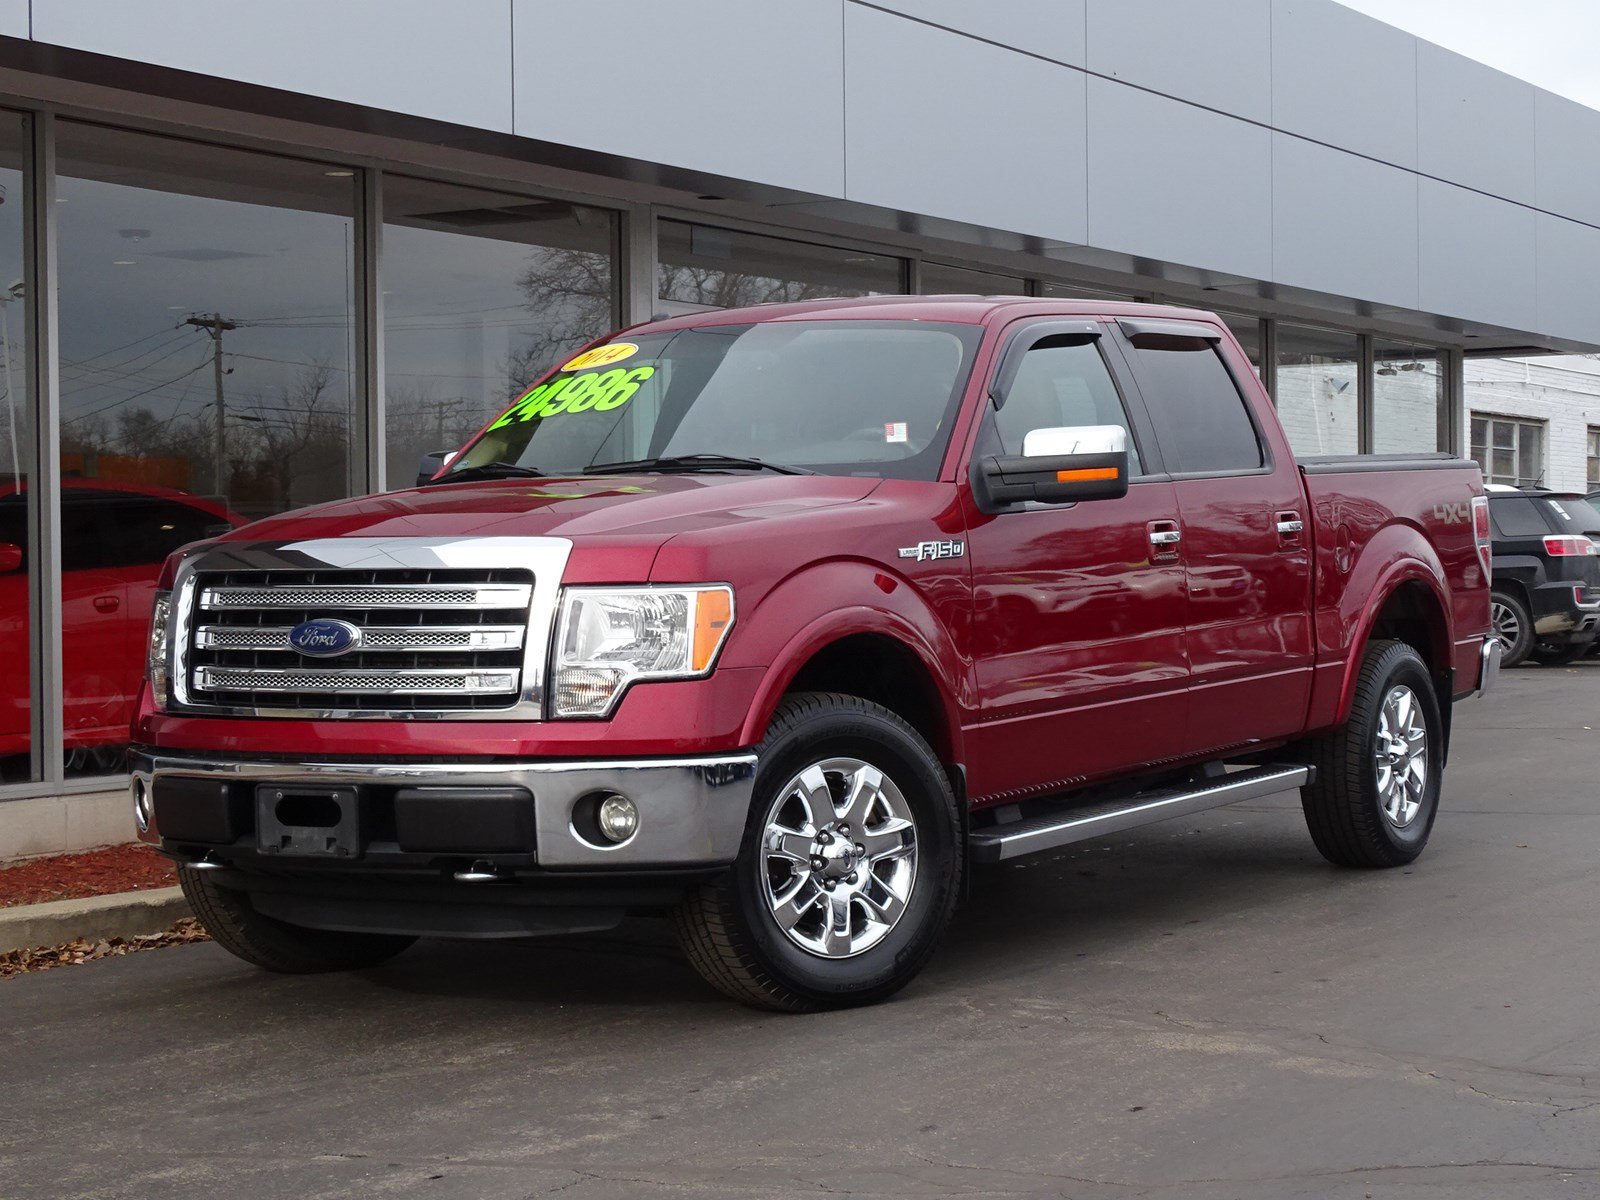 Pre-Owned 2014 Ford F-150 Lariat Crew Cab Pickup in Glen Ellyn #29544A